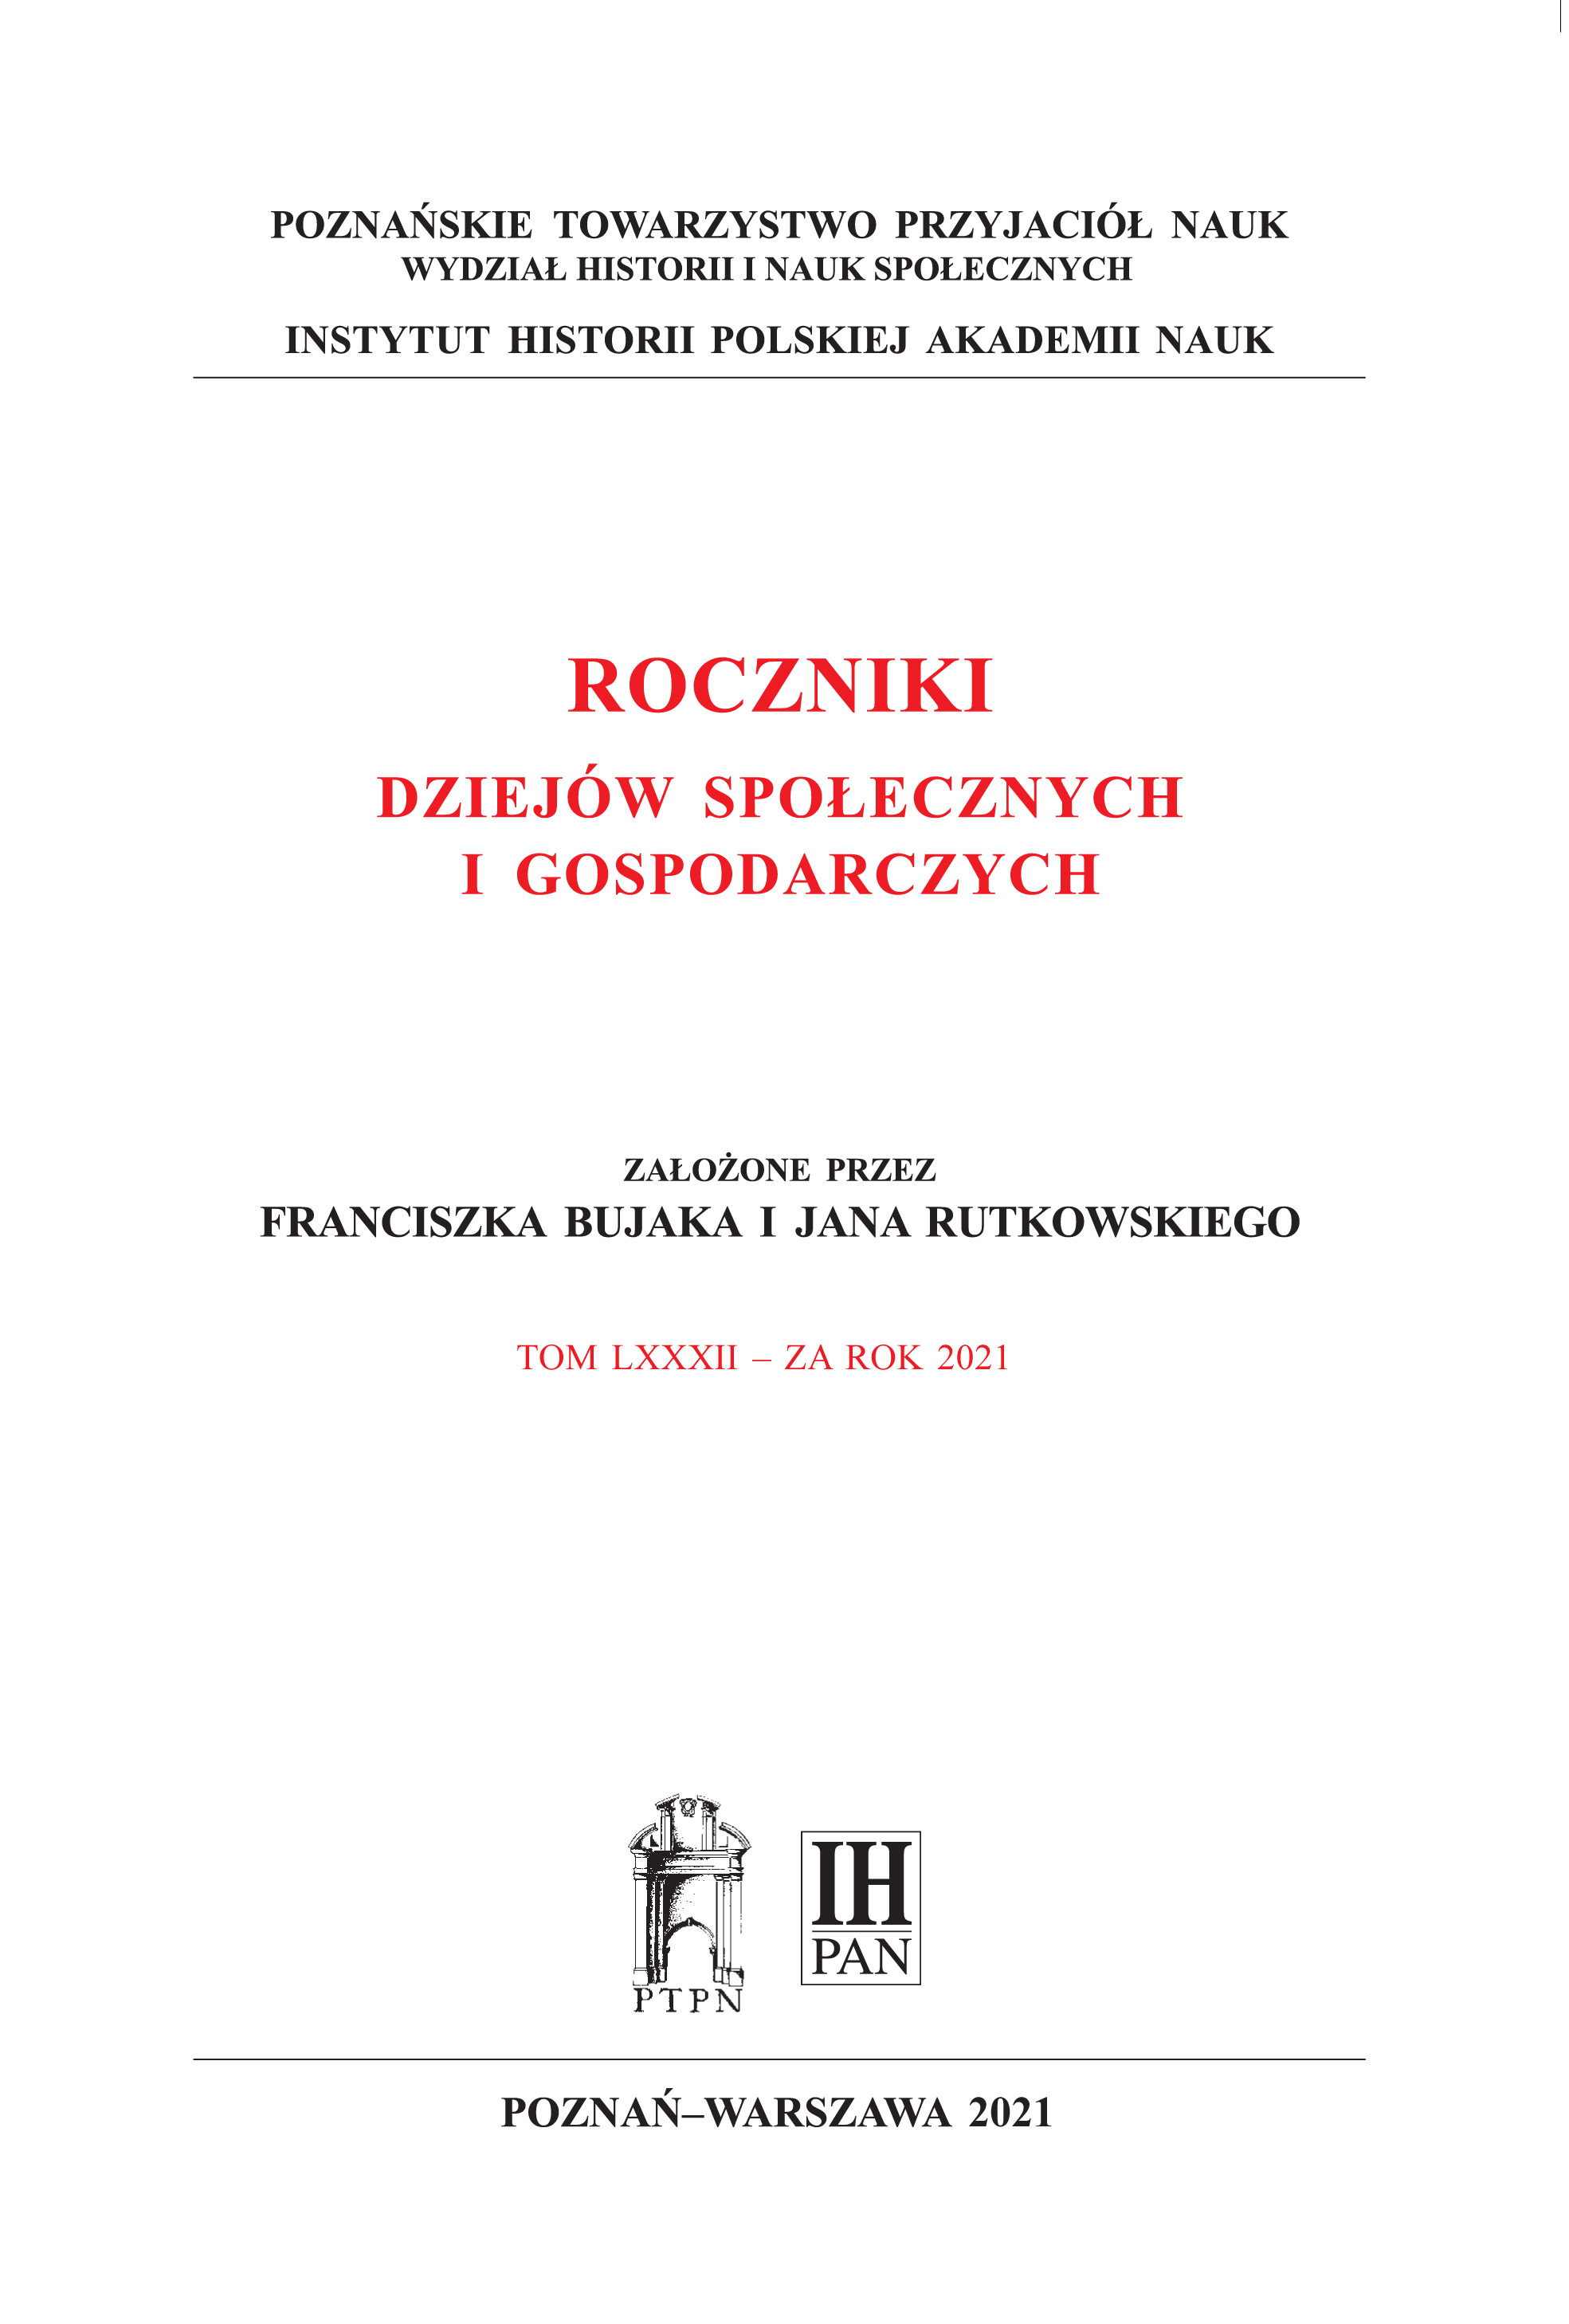 Excise duty on beer in the Second Polish Republic against the overall condition of the beer brewing industry Cover Image